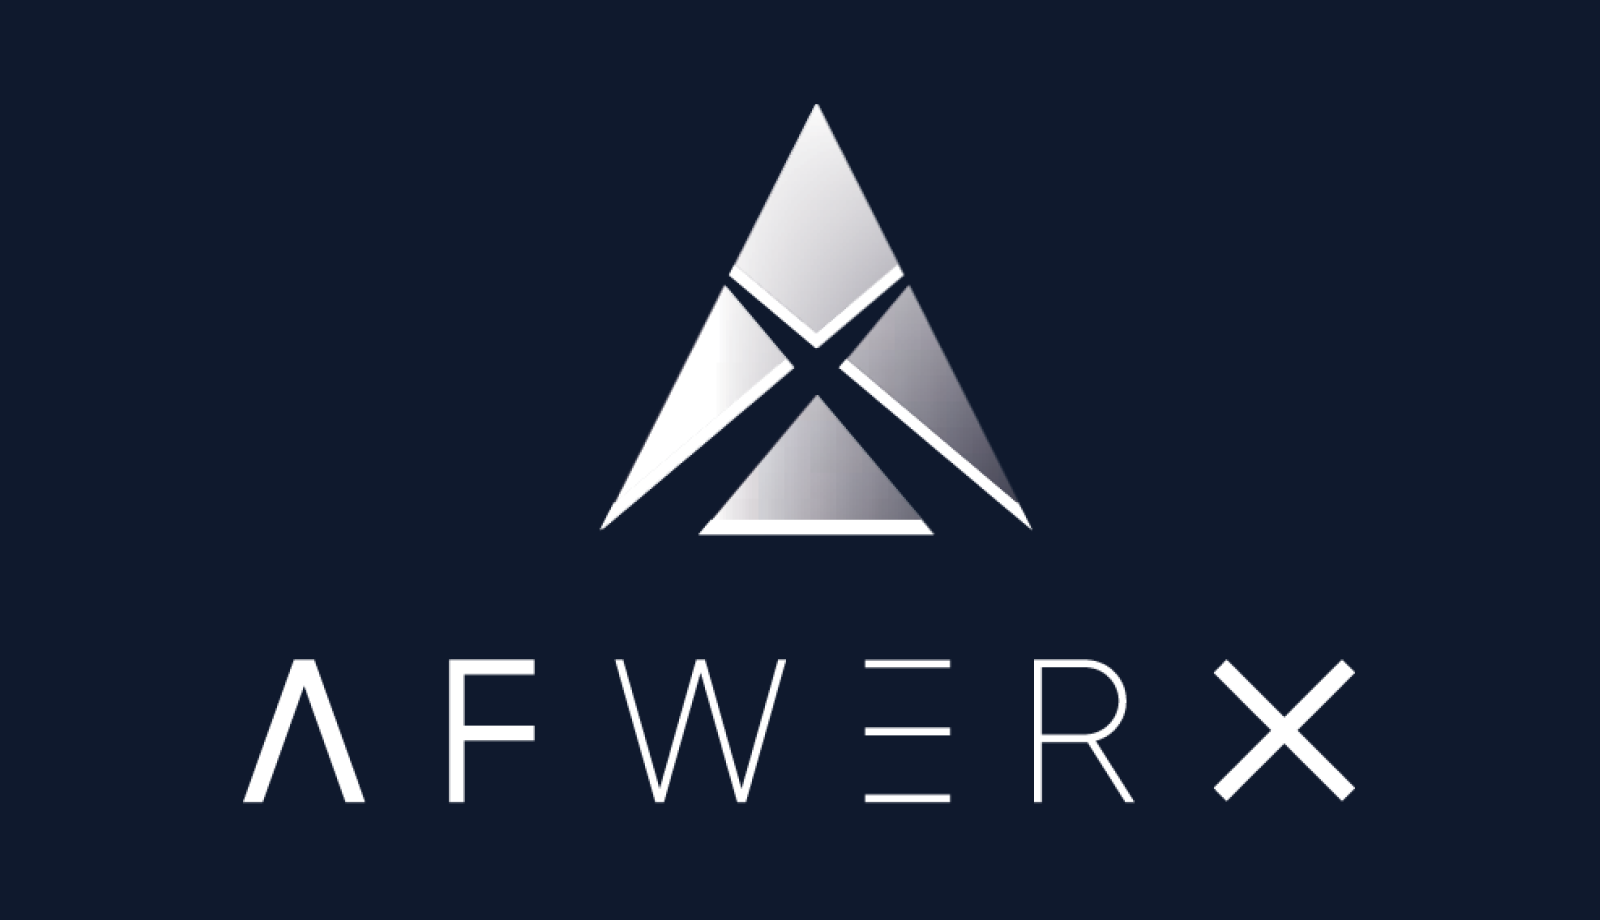 NetRise Awarded AFWERX STTR Phase I Contract to Bolster XIoT Security